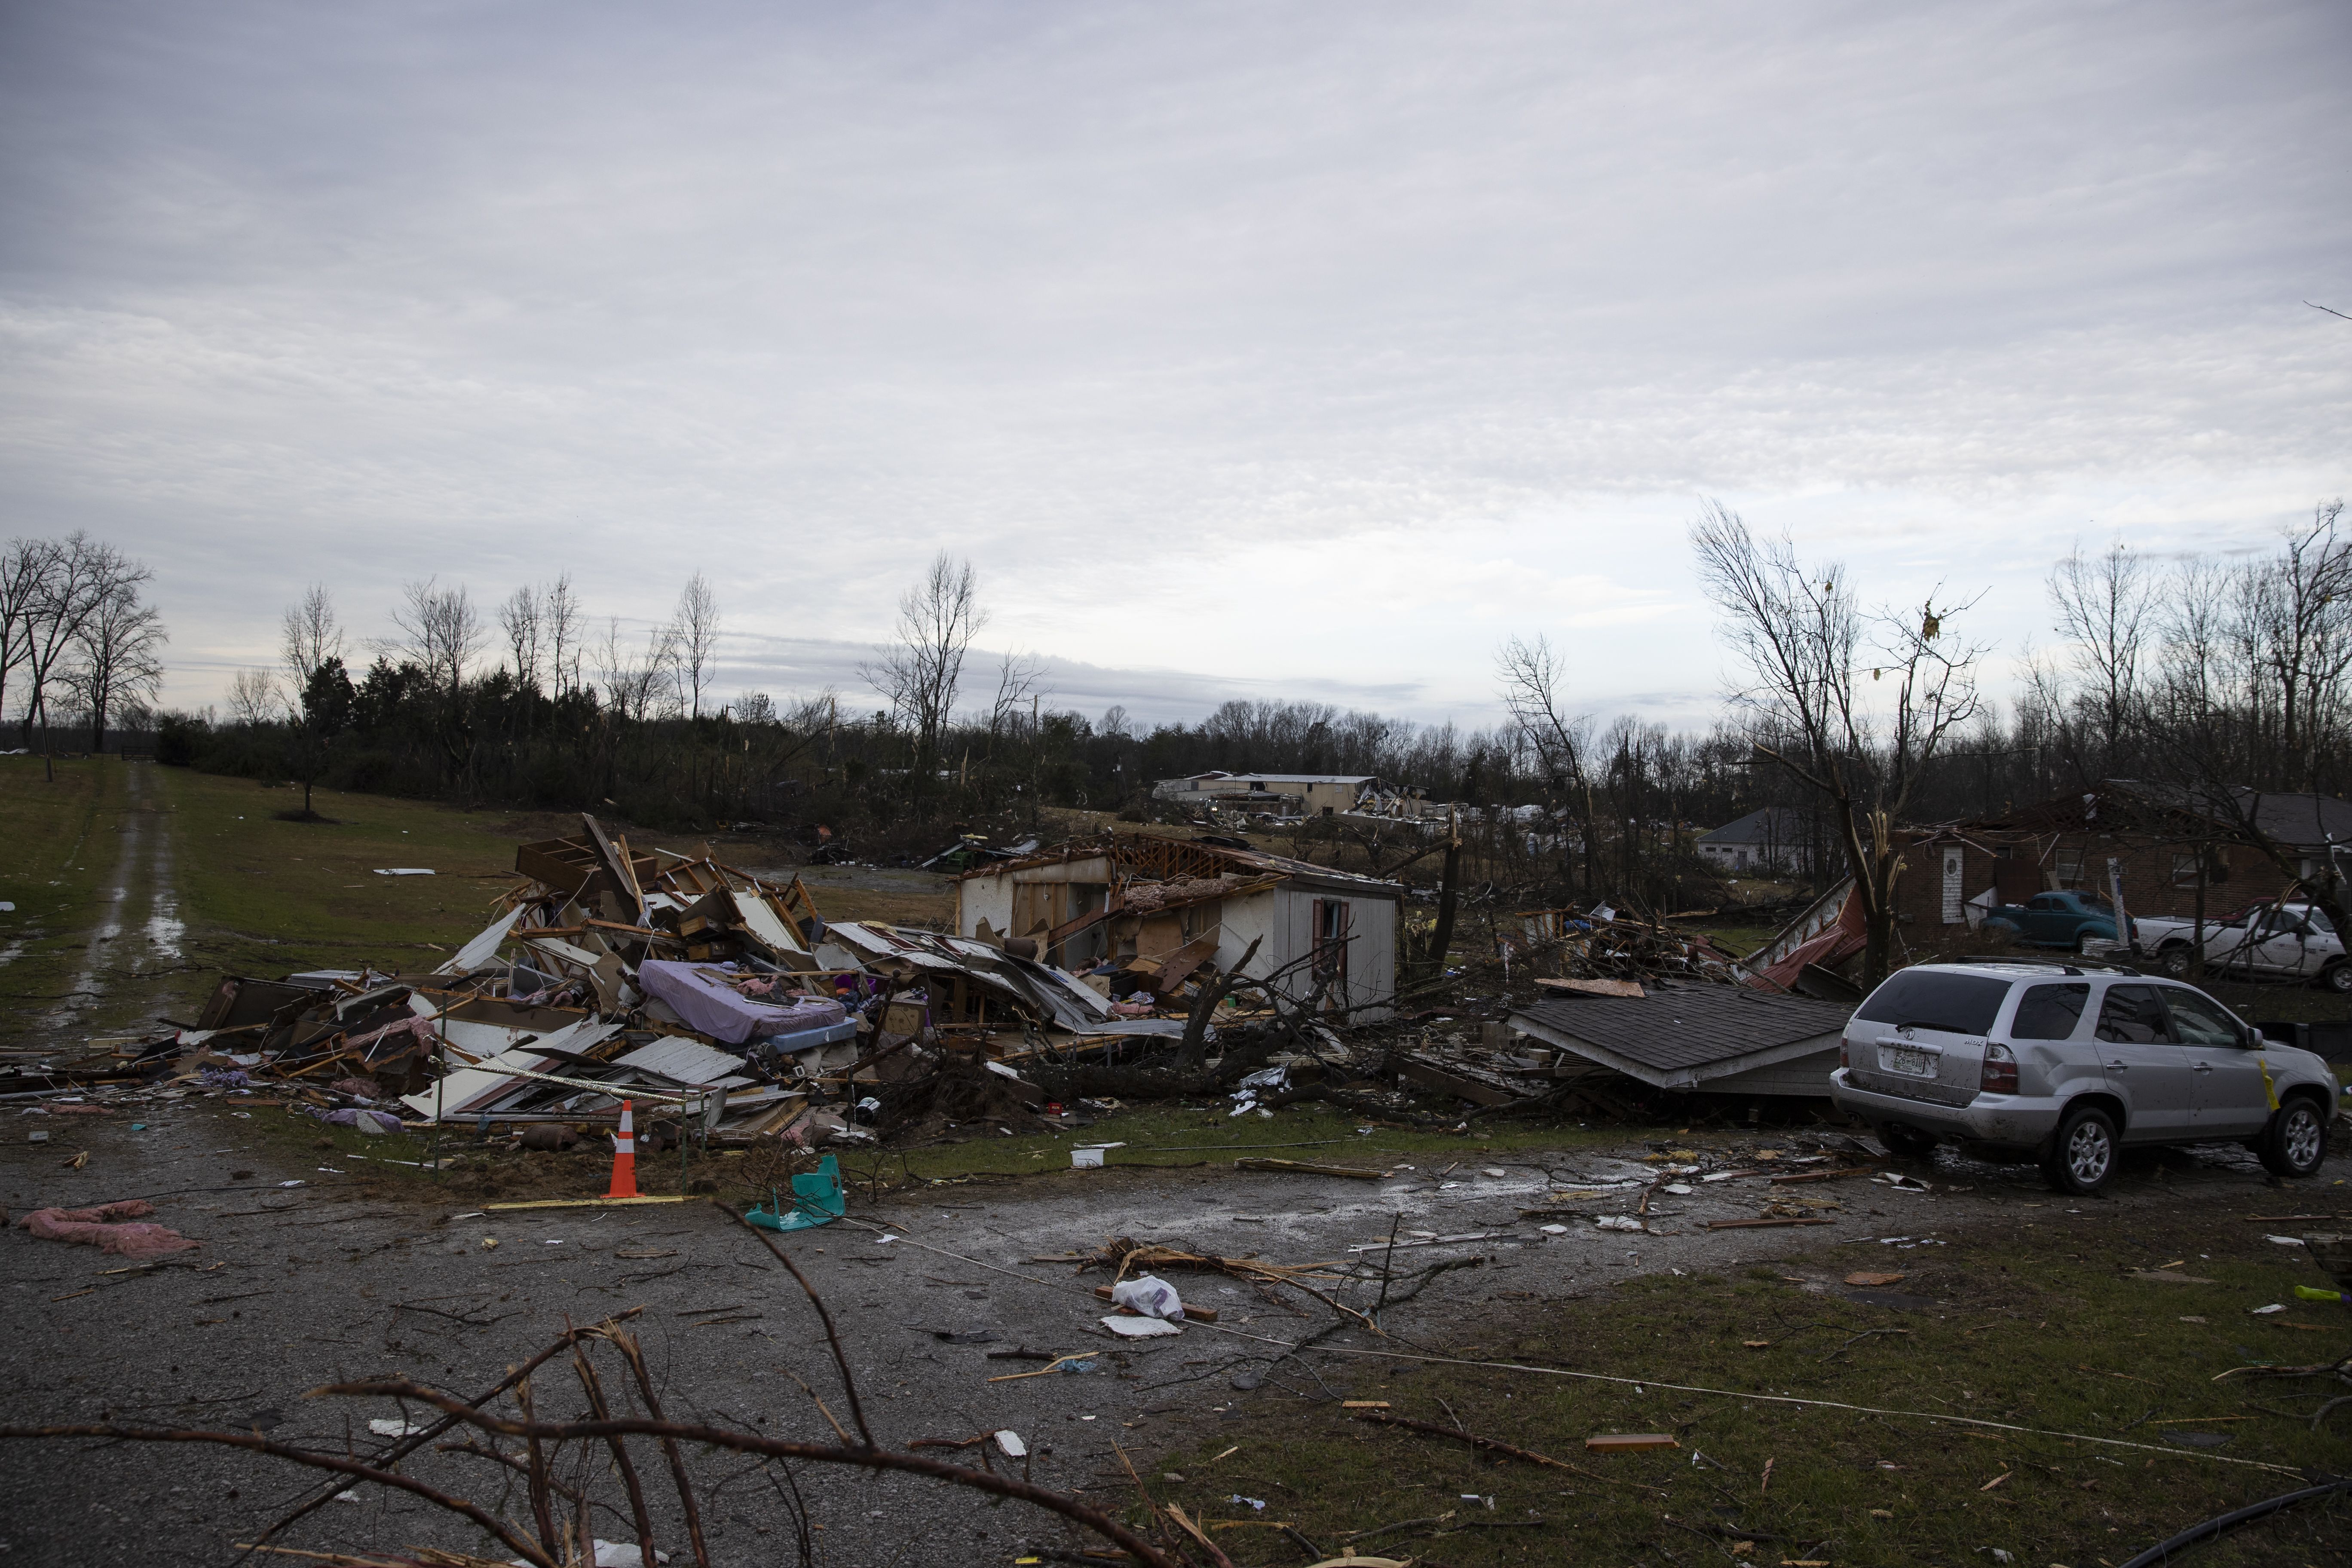 The aftermath of a tornado in Cookeville, Tennessee.